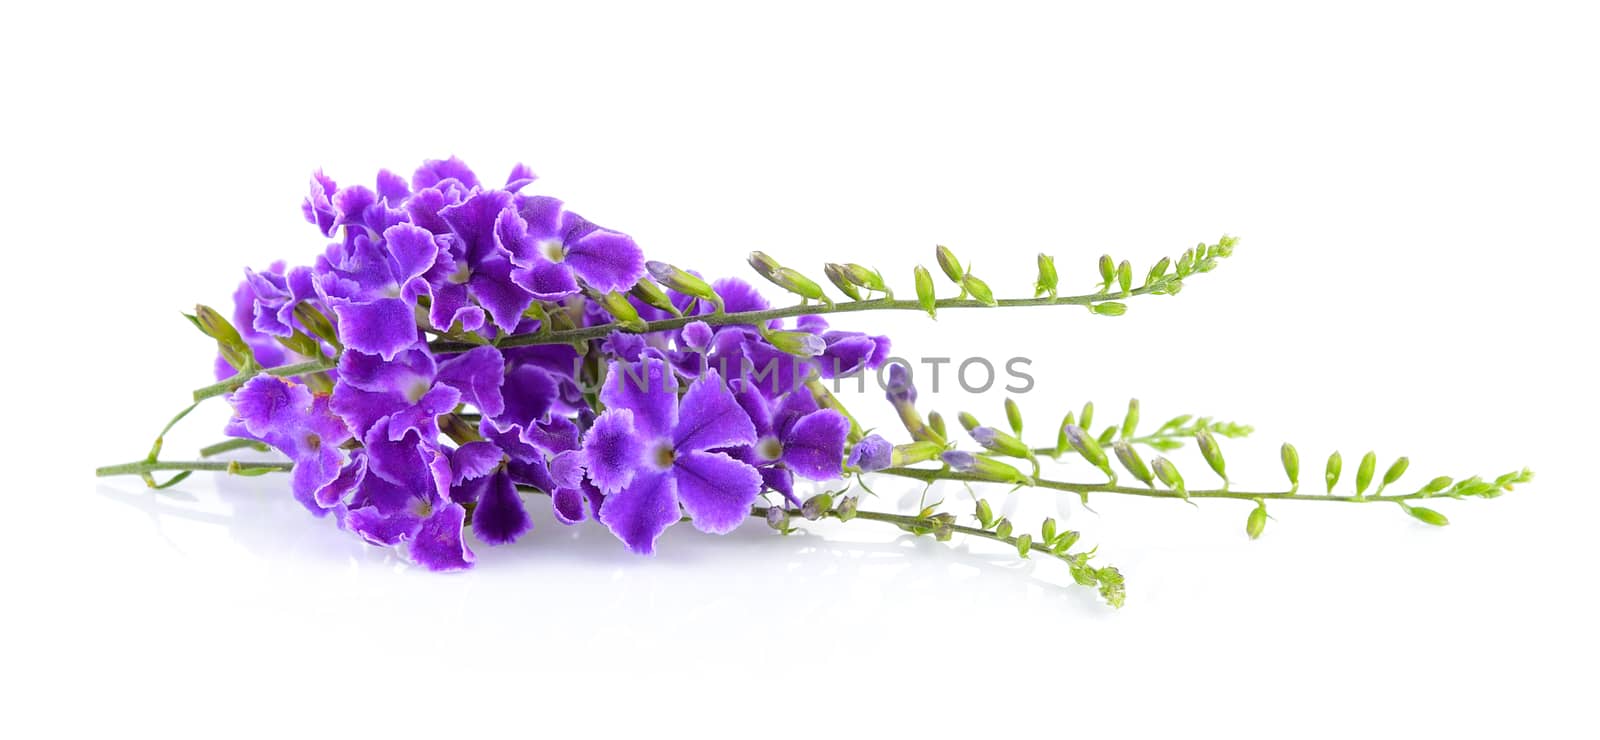 Purple flowers on white background by sommai